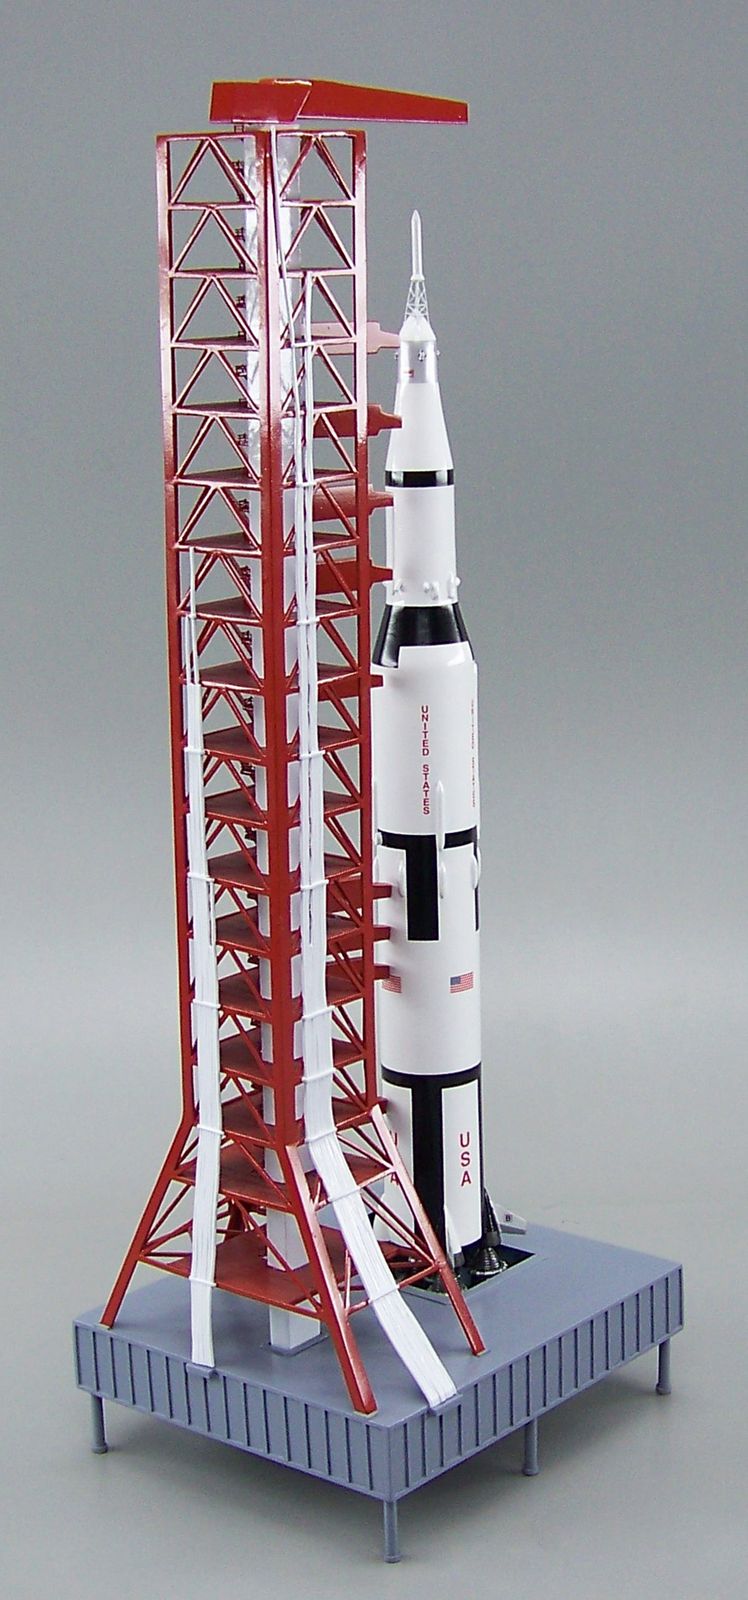 Nasa Apollo Saturn V Rocket On Tower Launch Pad Scale